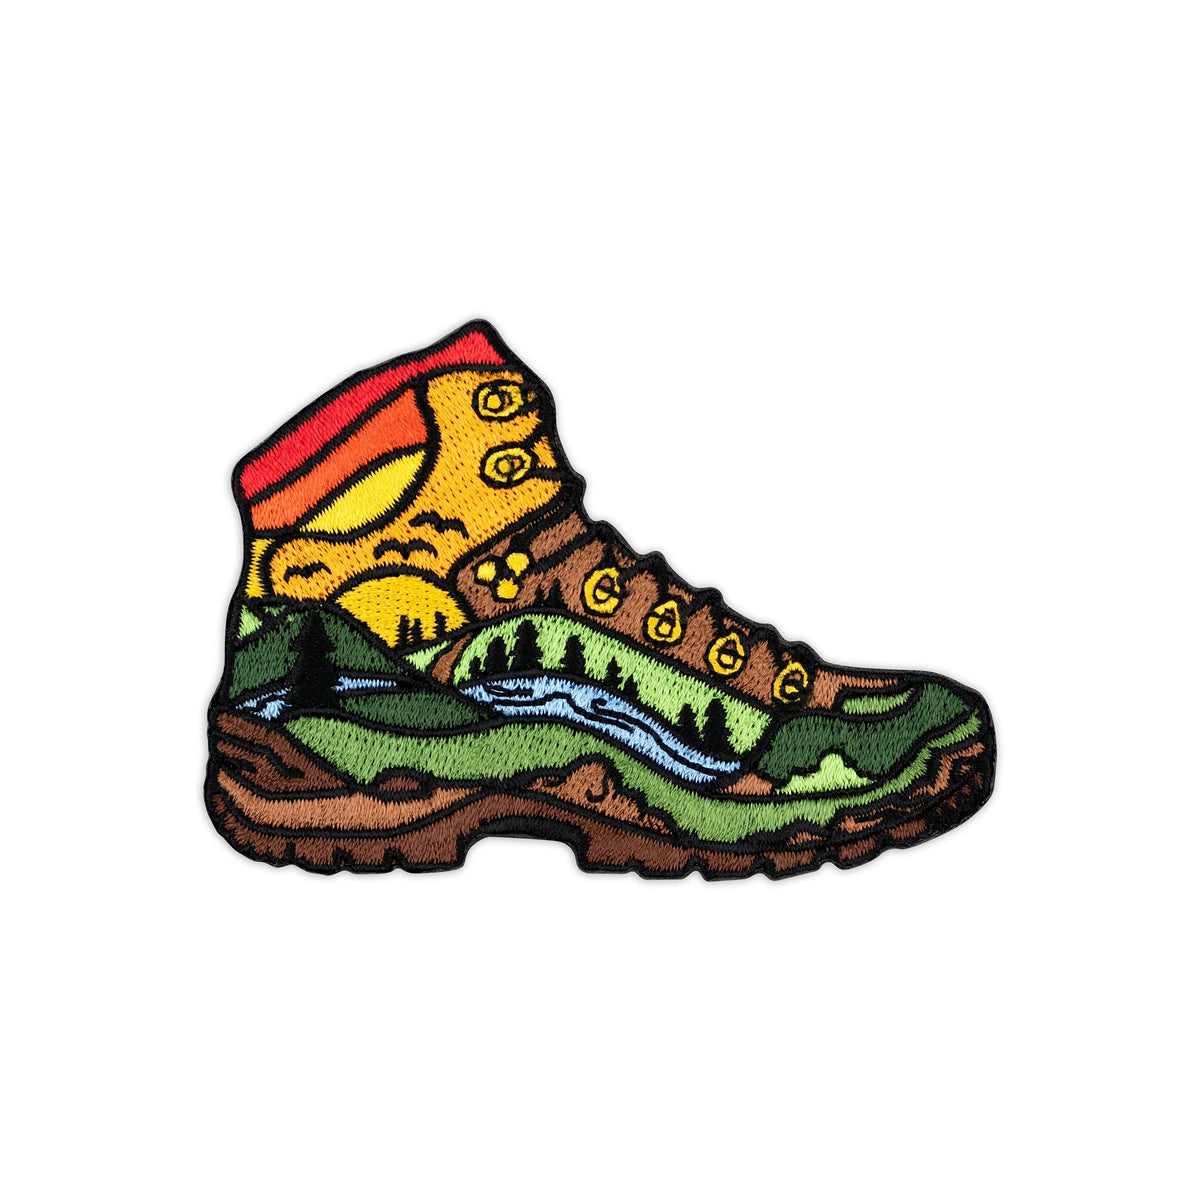 Hiked It Liked It Hiking Boot embroidered iron-on patch